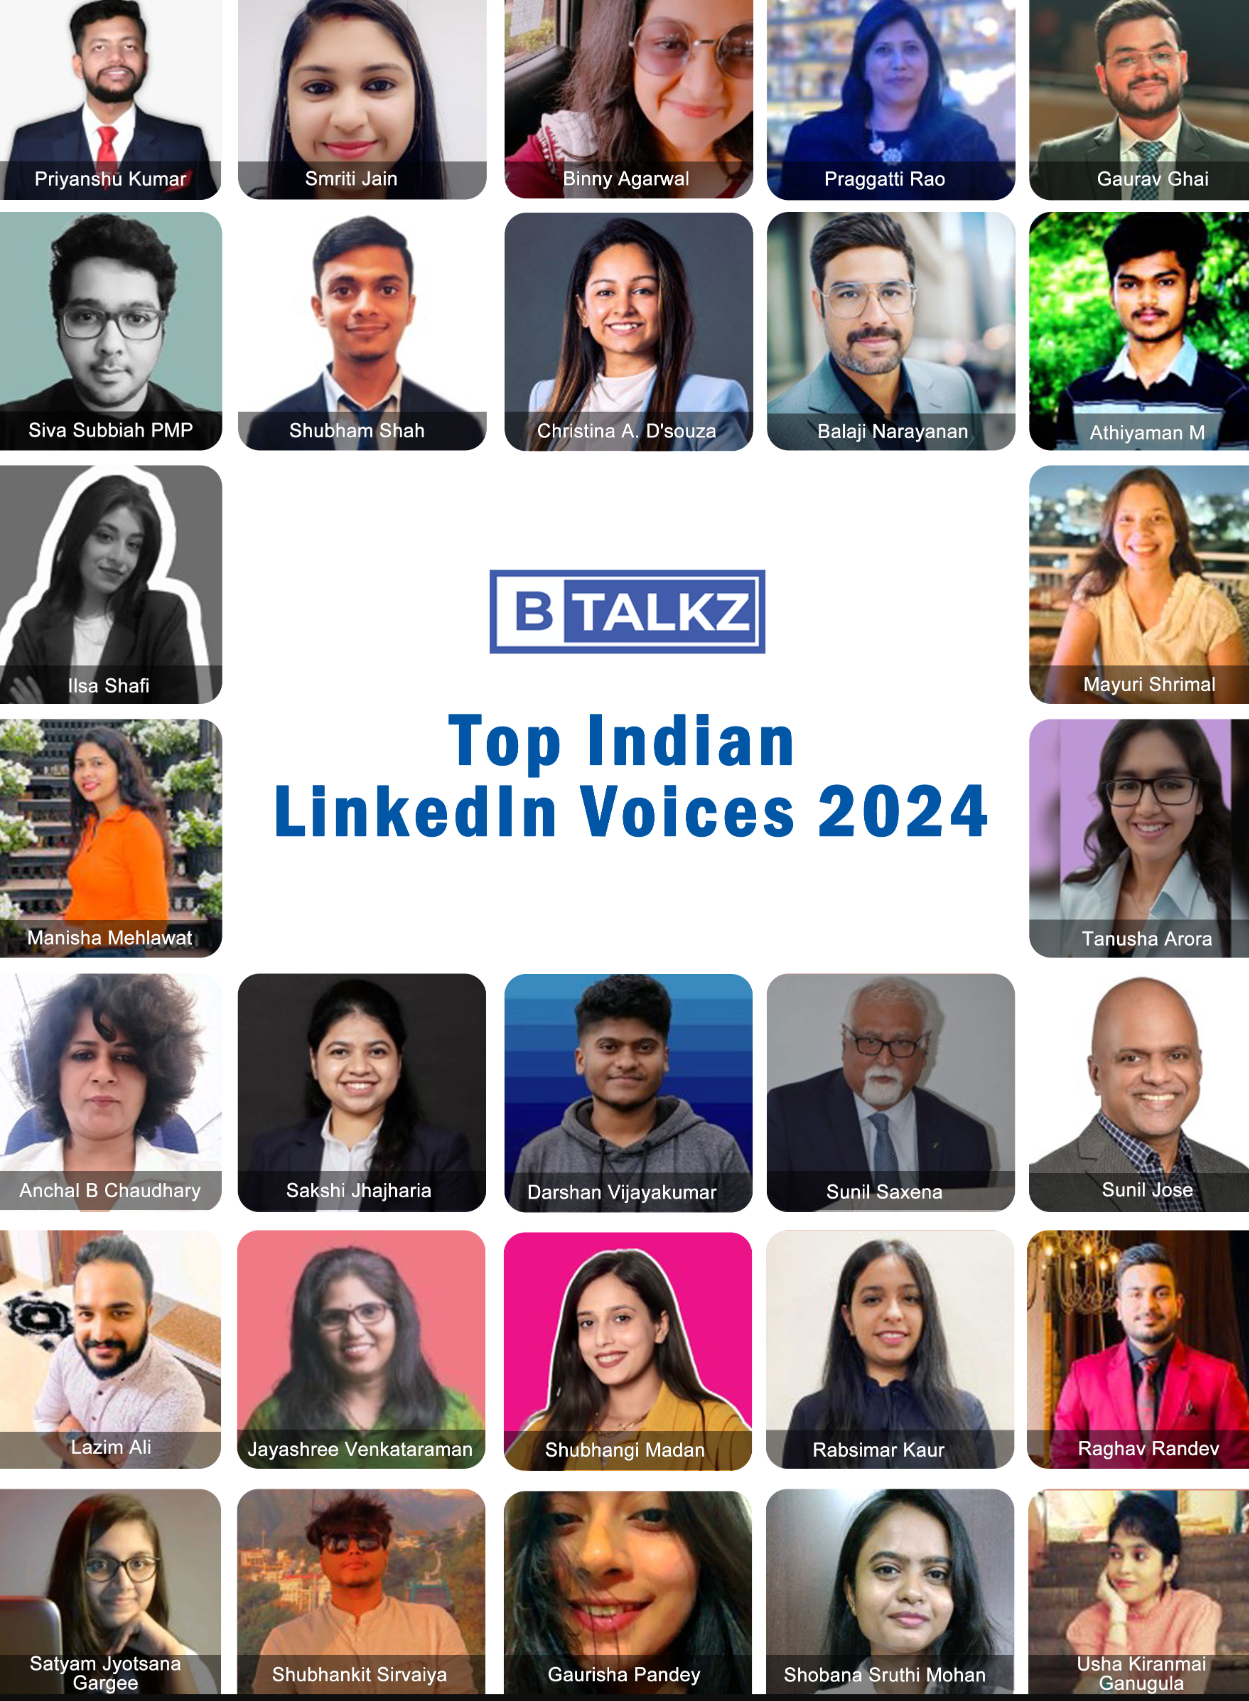 Leading LinkedIn Voices of India 2024